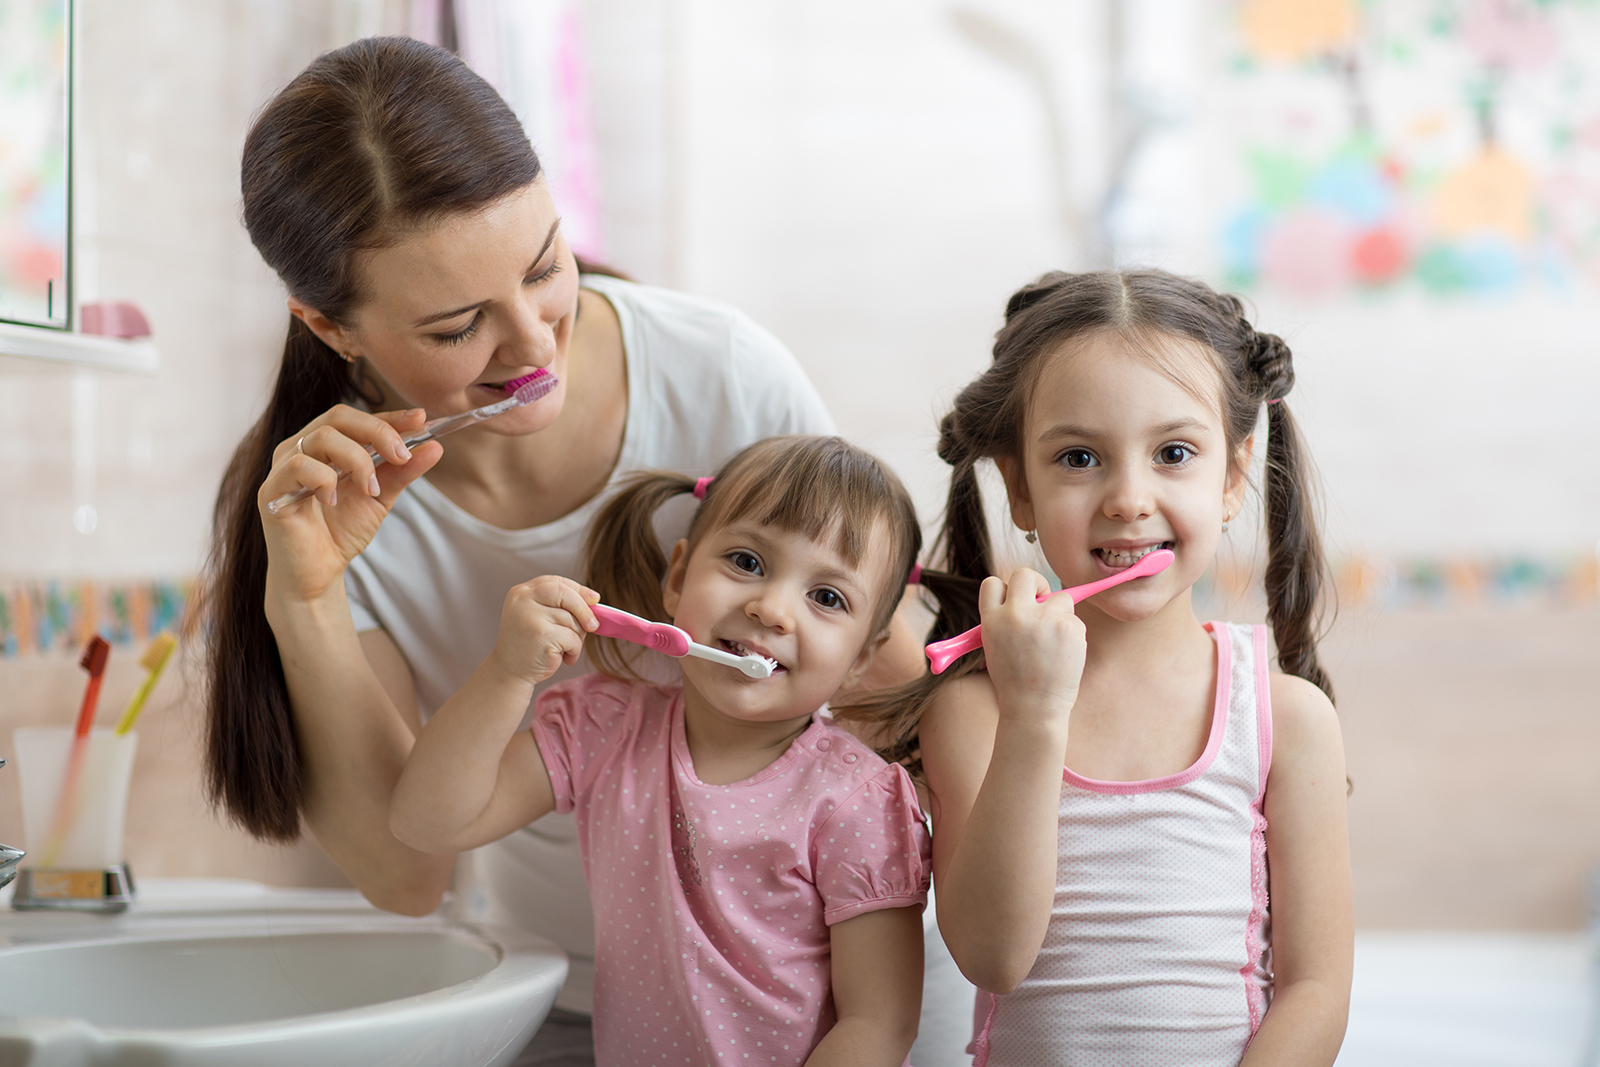 Featured image for “October is National Dental Hygiene Month”